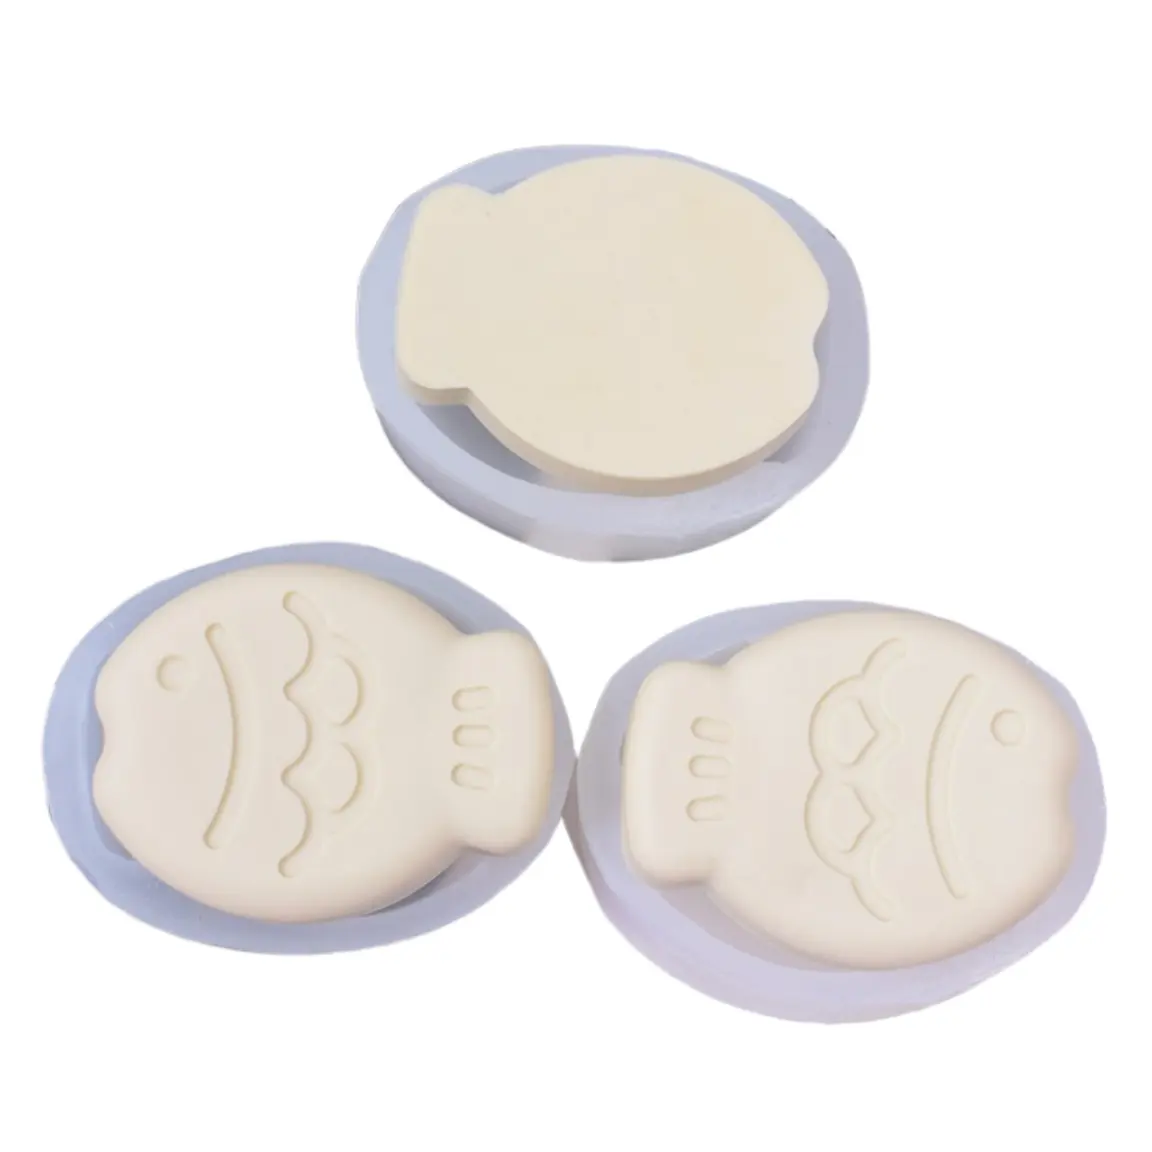 Cute Gypsum Fish-Shaped DIY Soap Mould Baking Cake Molds and Polymer Clay Crayons Wax Melt Plaster Mould Made of Silicone